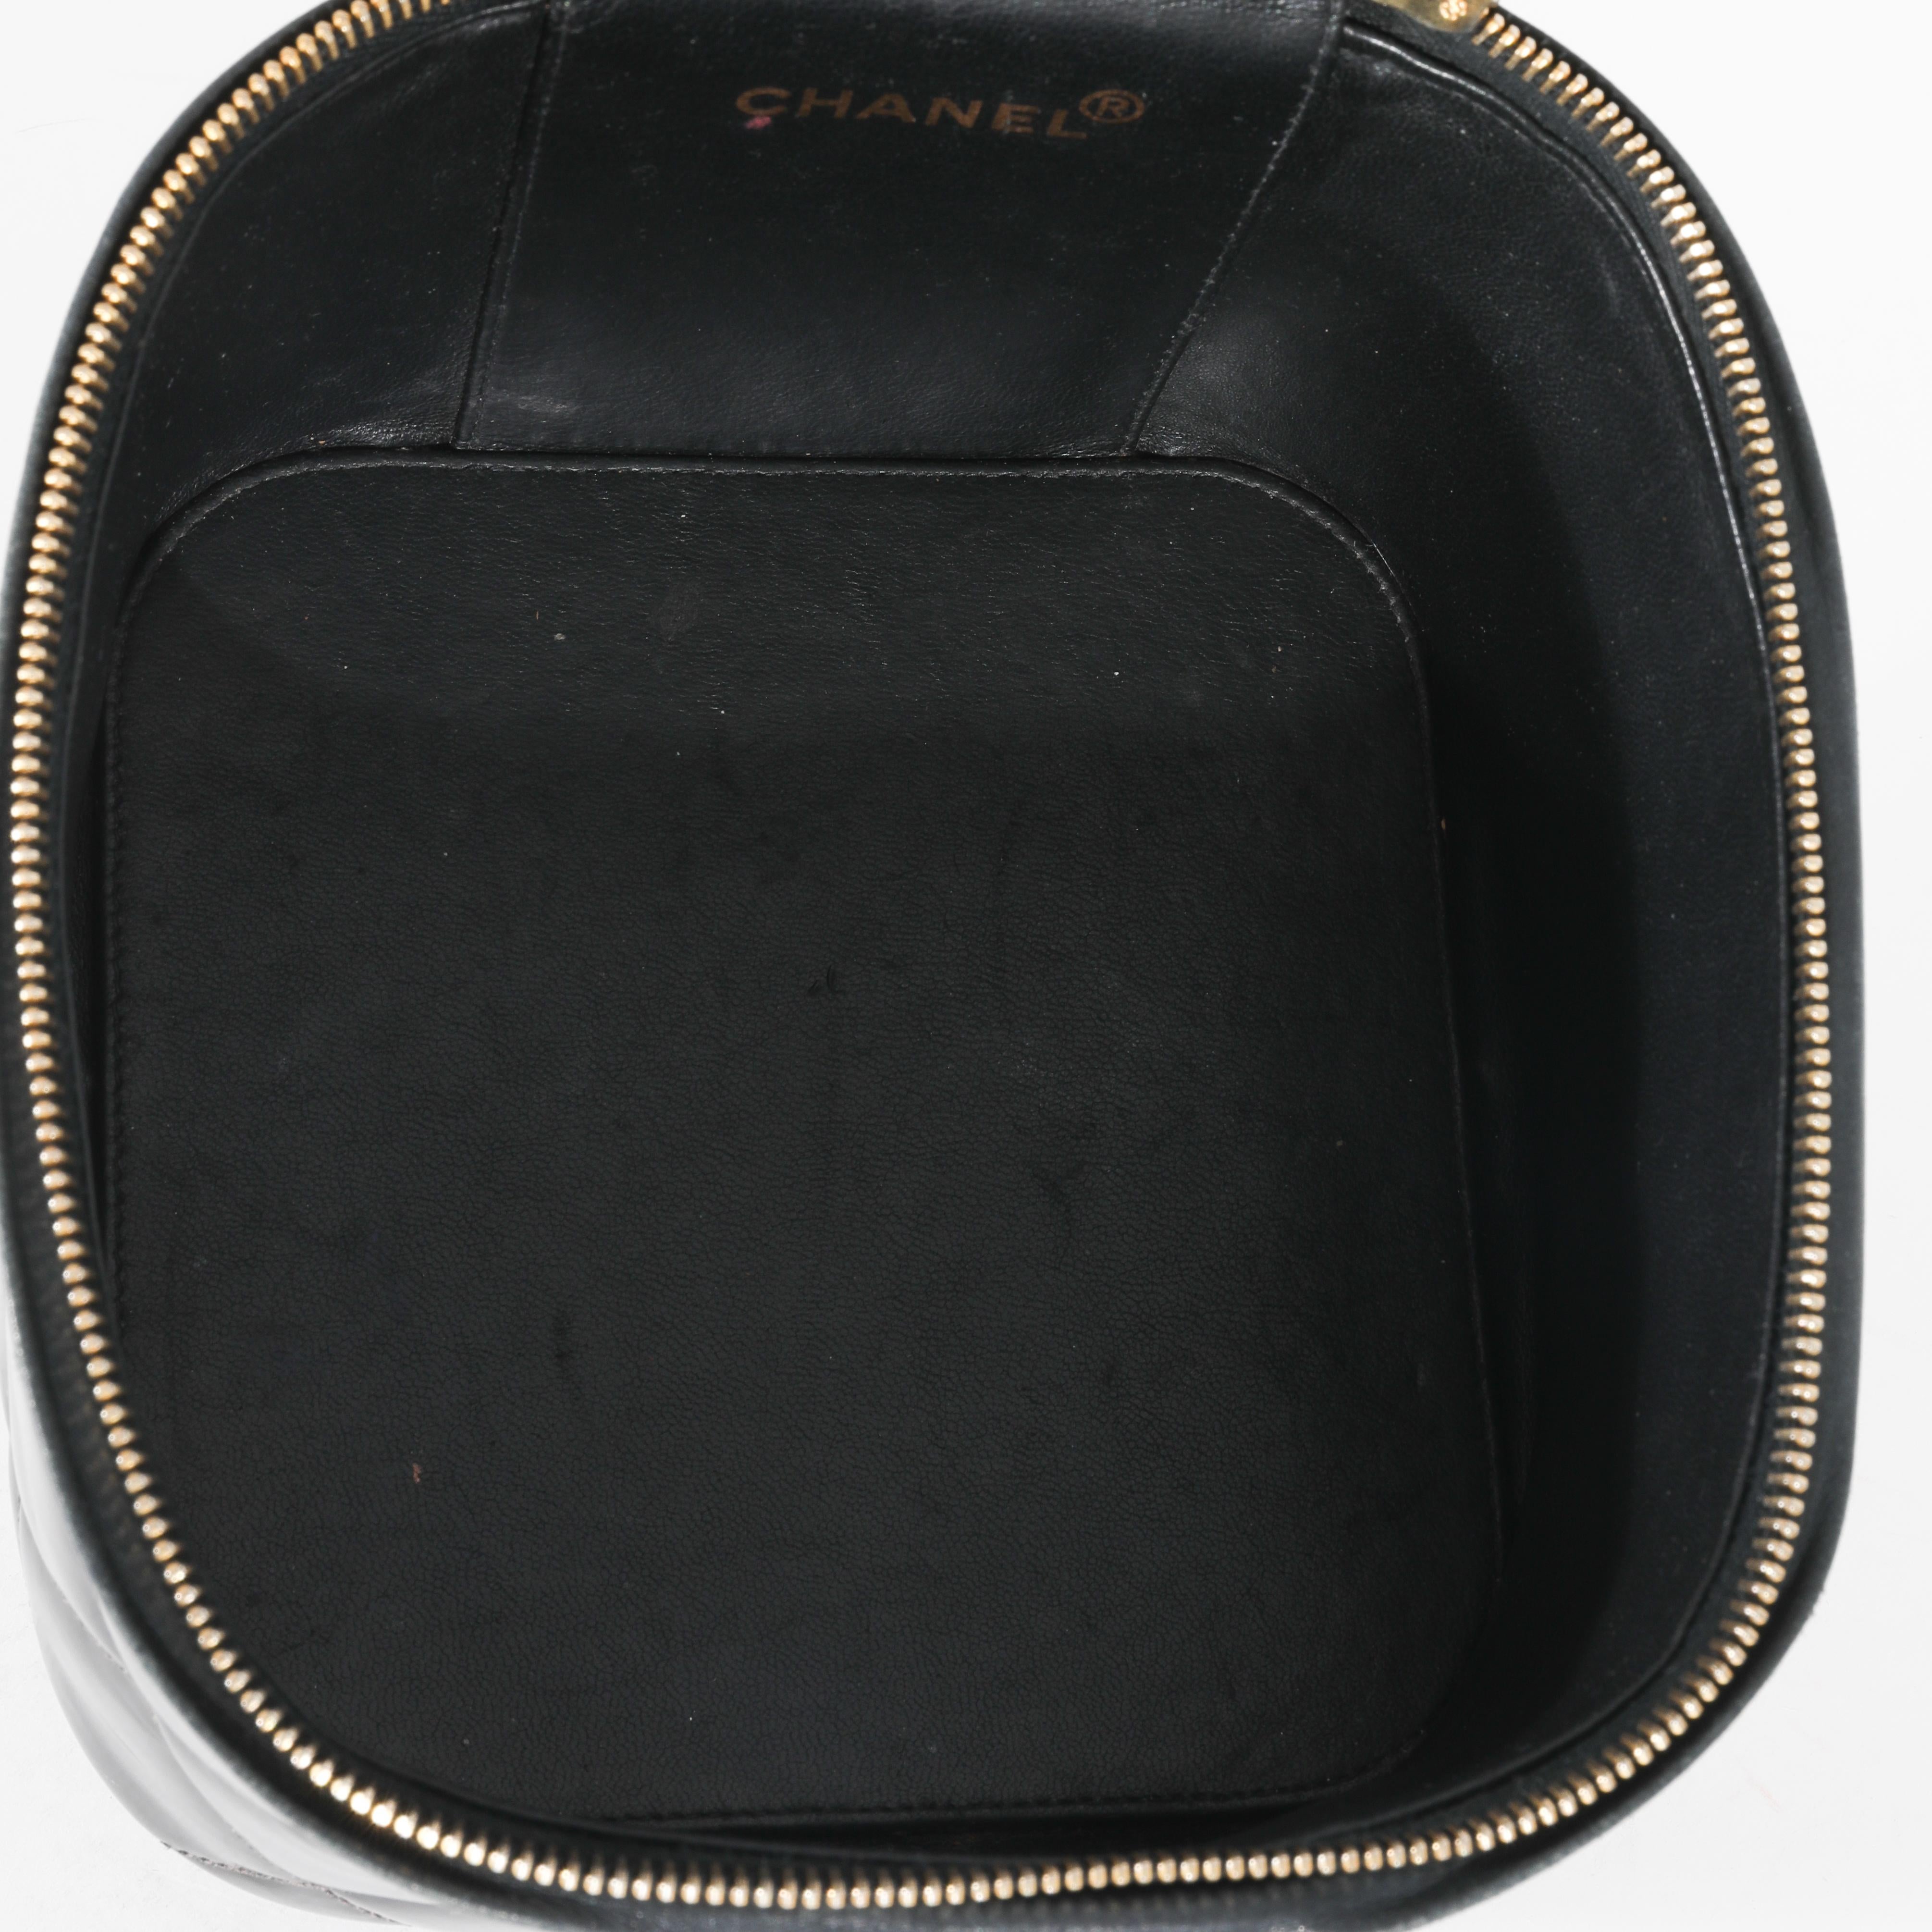 Listing Title: Chanel Vintage 24K Black Patent CC Vanity Case
SKU: 130524
Condition: Pre-owned 
Handbag Condition: Fair
Condition Comments: Fair Condition. Extensive discoloration, scuffing at handles and throughout. Extensive exterior scuffing,